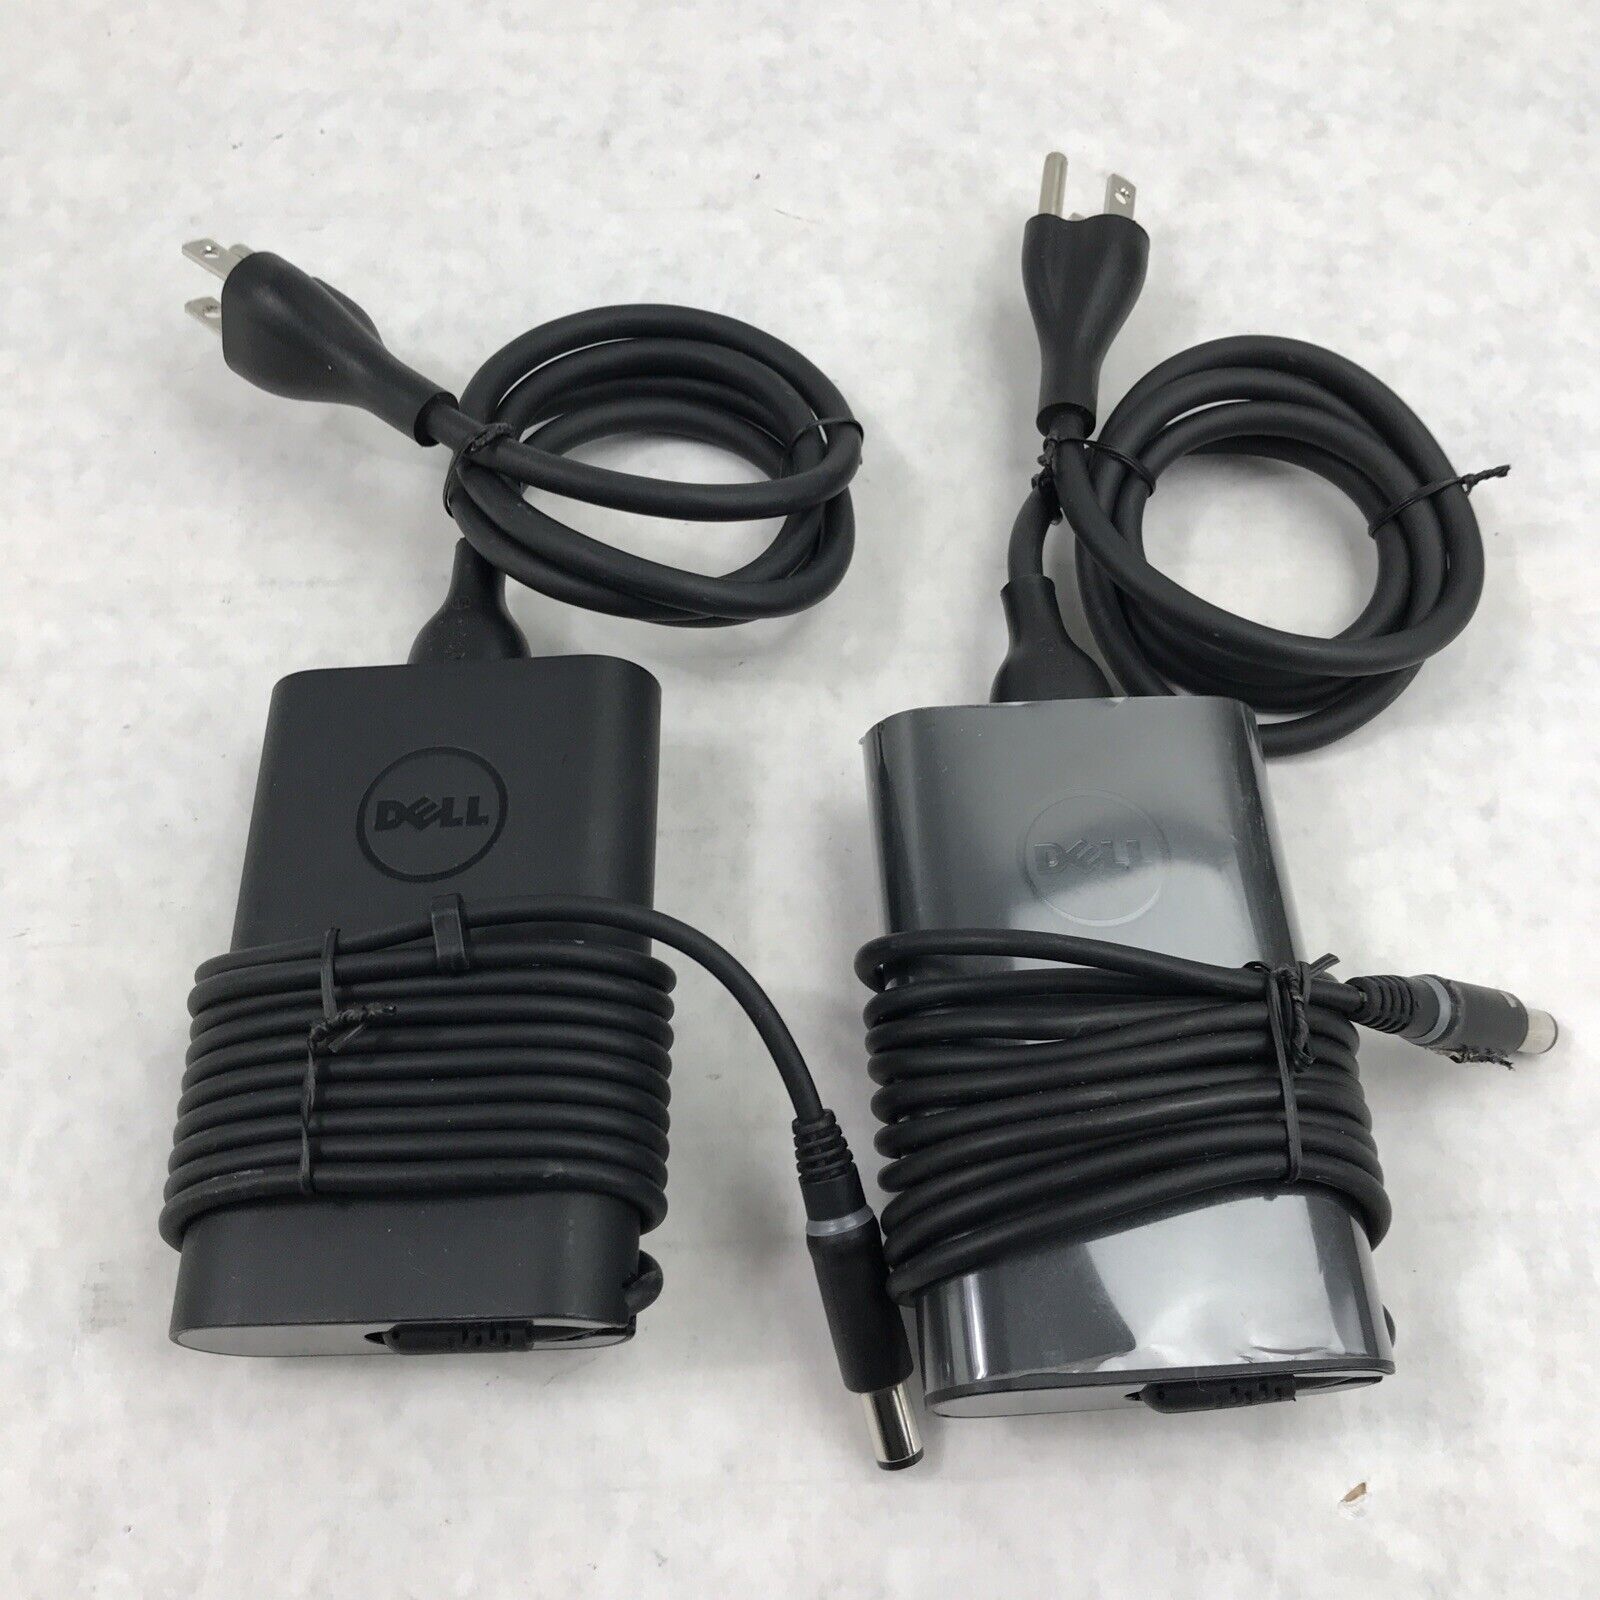 Charger AC Adapter 65W Power Supply for Dell Inspiron 19.5V JNKWD (Lot of 2)